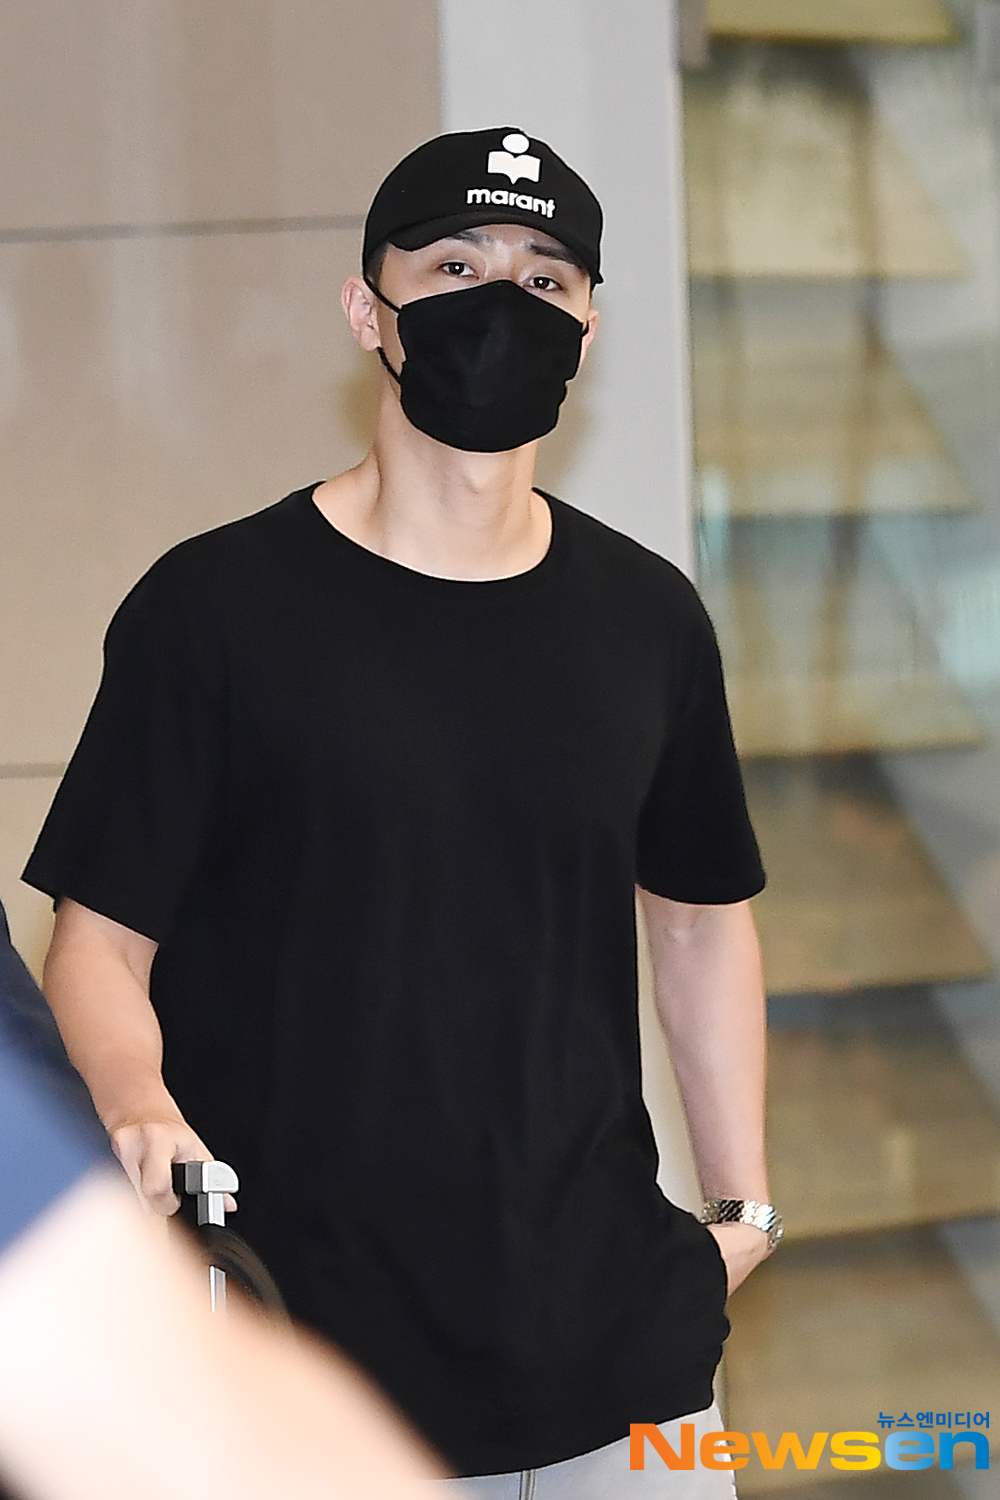 Actor Park Seo-joon arrives in Taiwan after completing an overseas promotion schedule held in Taiwan through Incheon International Airport in Unseo-dong, Jung-gu, Incheon, on the afternoon of August 30.exponential earthquake